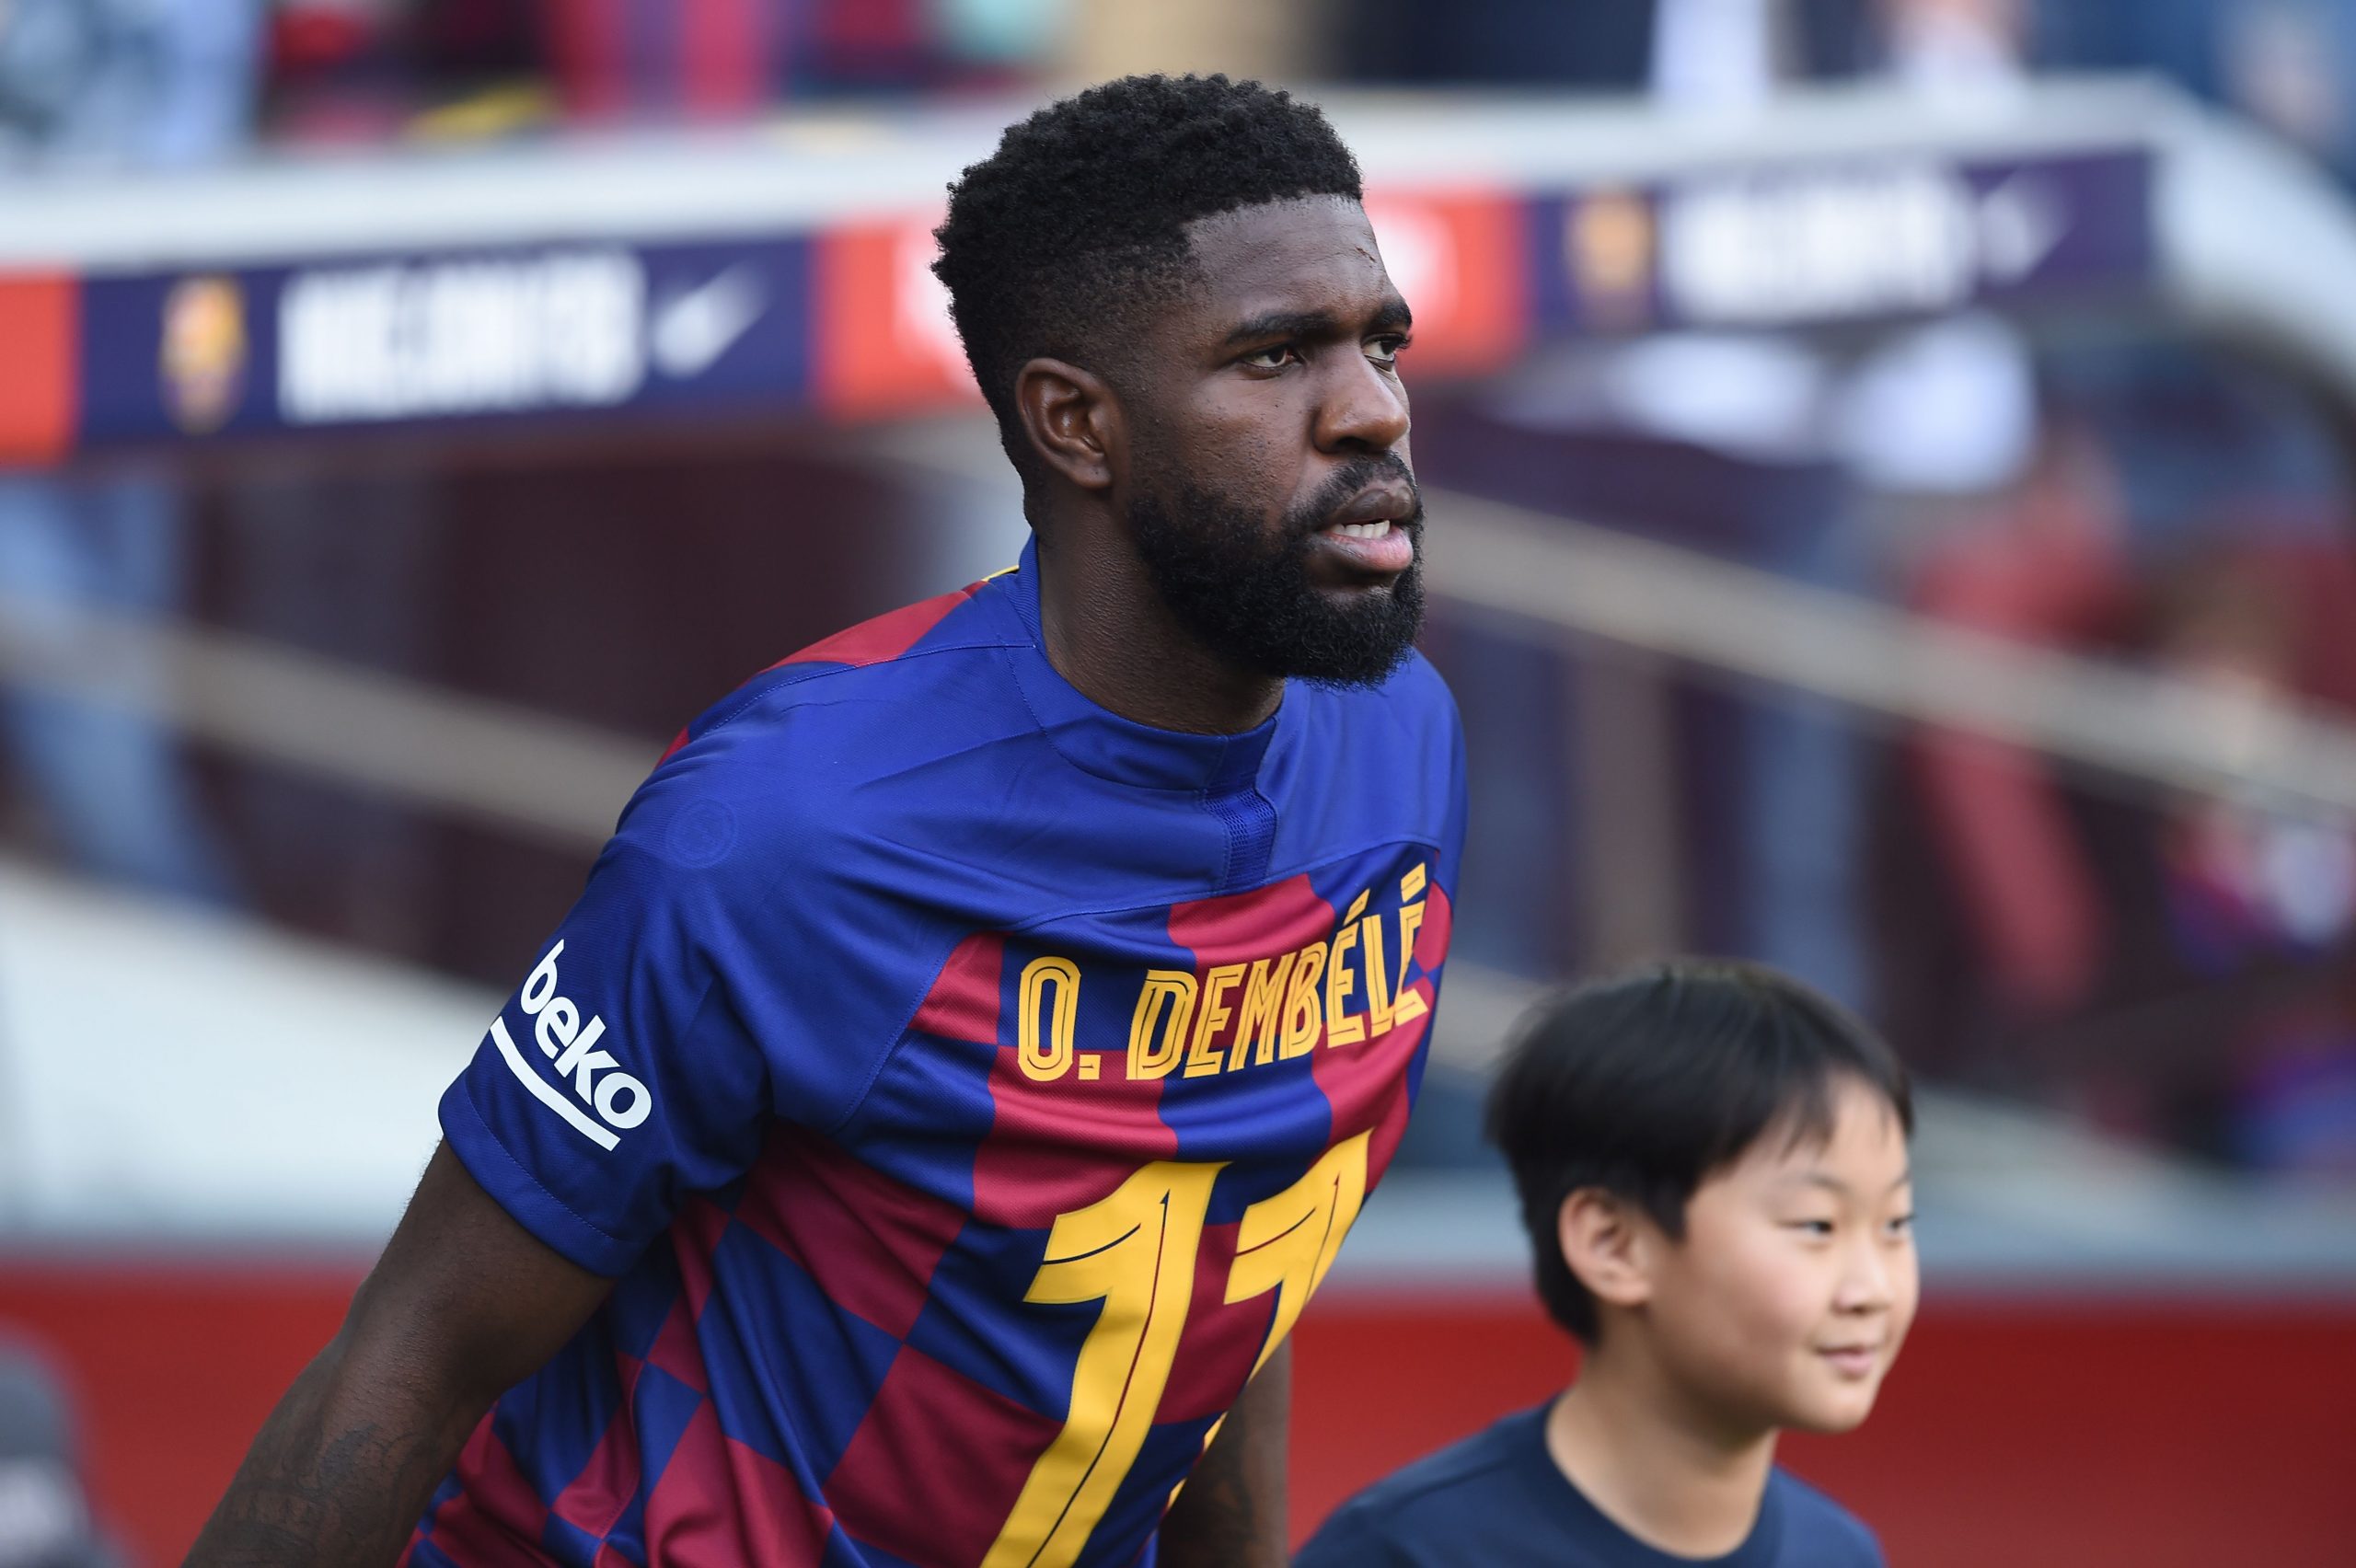 Barcelona's French defender Samuel Umtiti wears a jersey in support of teammate Barcelona's French forward Ousmane Dembele before the Spanish league football match between FC Barcelona and Getafe CF at the Camp Nou stadium in Barcelona on February 15, 2020.  (Photo by JOSEP LAGO/AFP via Getty Images)